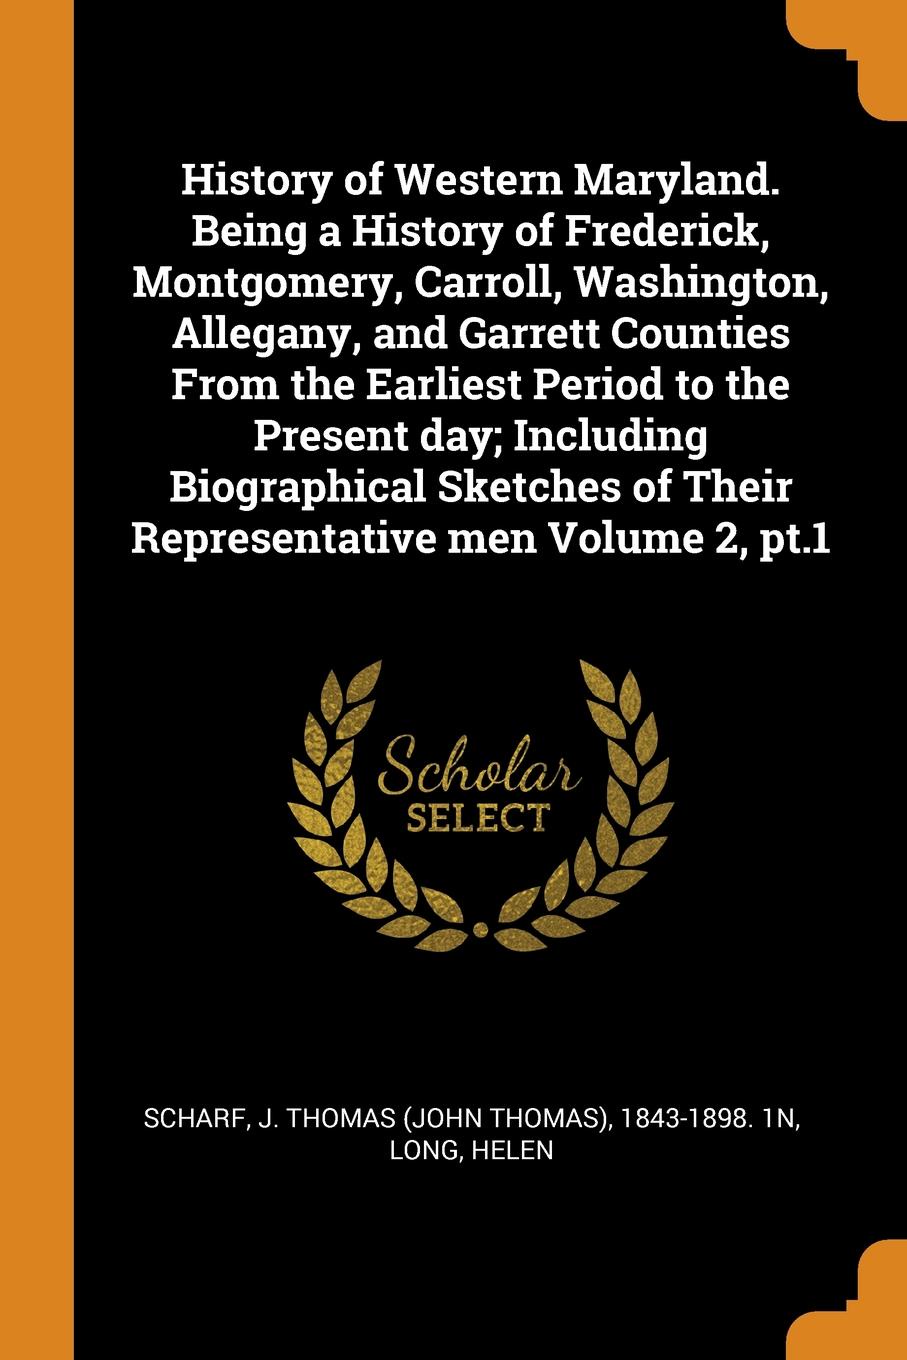 History of Western Maryland. Being a History of Frederick, Montgomery, Carroll, Washington, Allegany, and Garrett Counties From the Earliest Period to the Present day; Including Biographical Sketches of Their Representative men Volume 2, pt.1